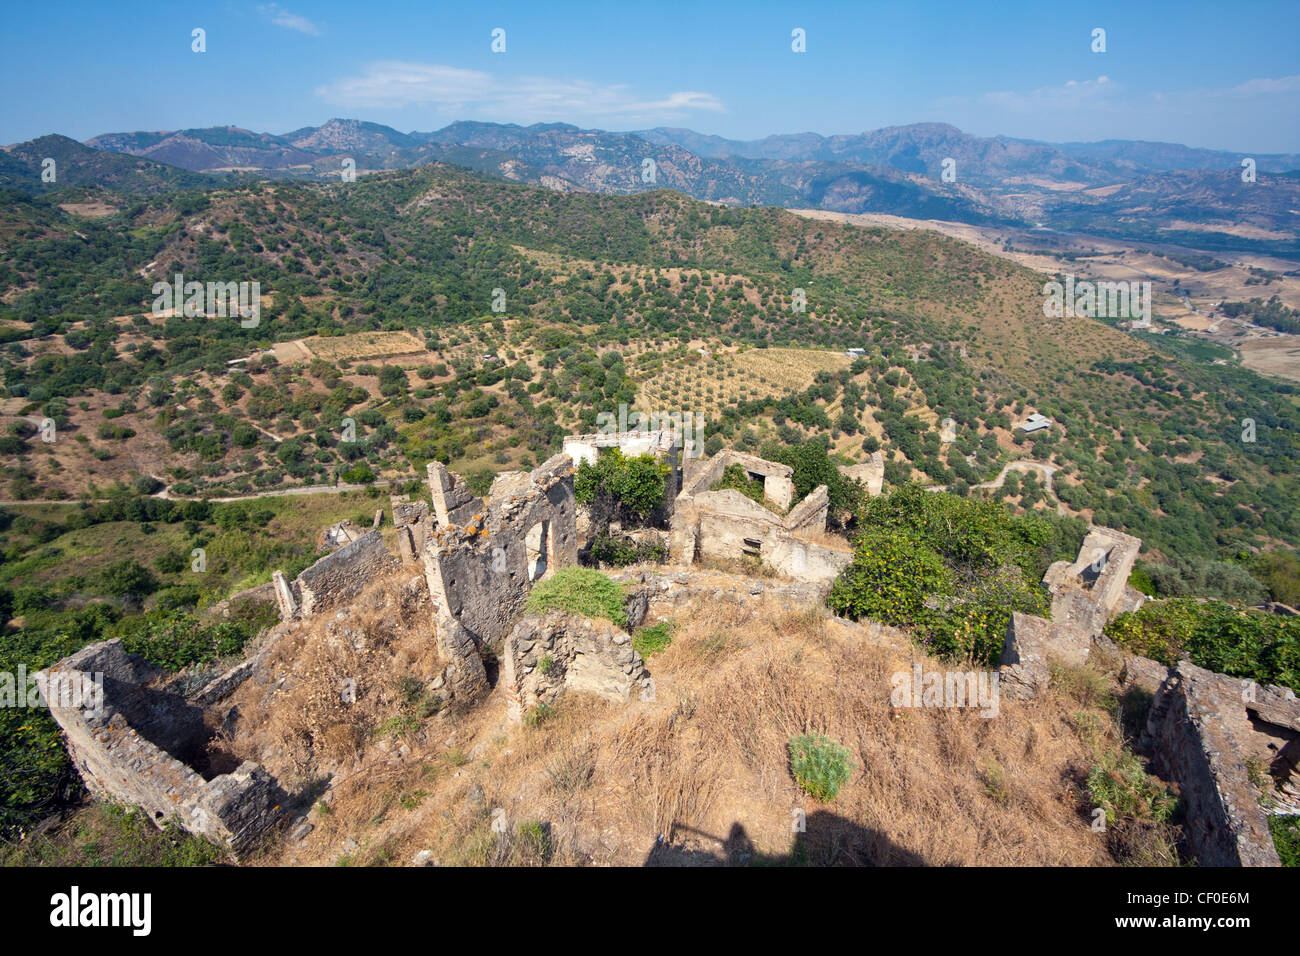 Ruins in Brancaleone Superiore, a ghost town in Calabria, Italy Stock Photo